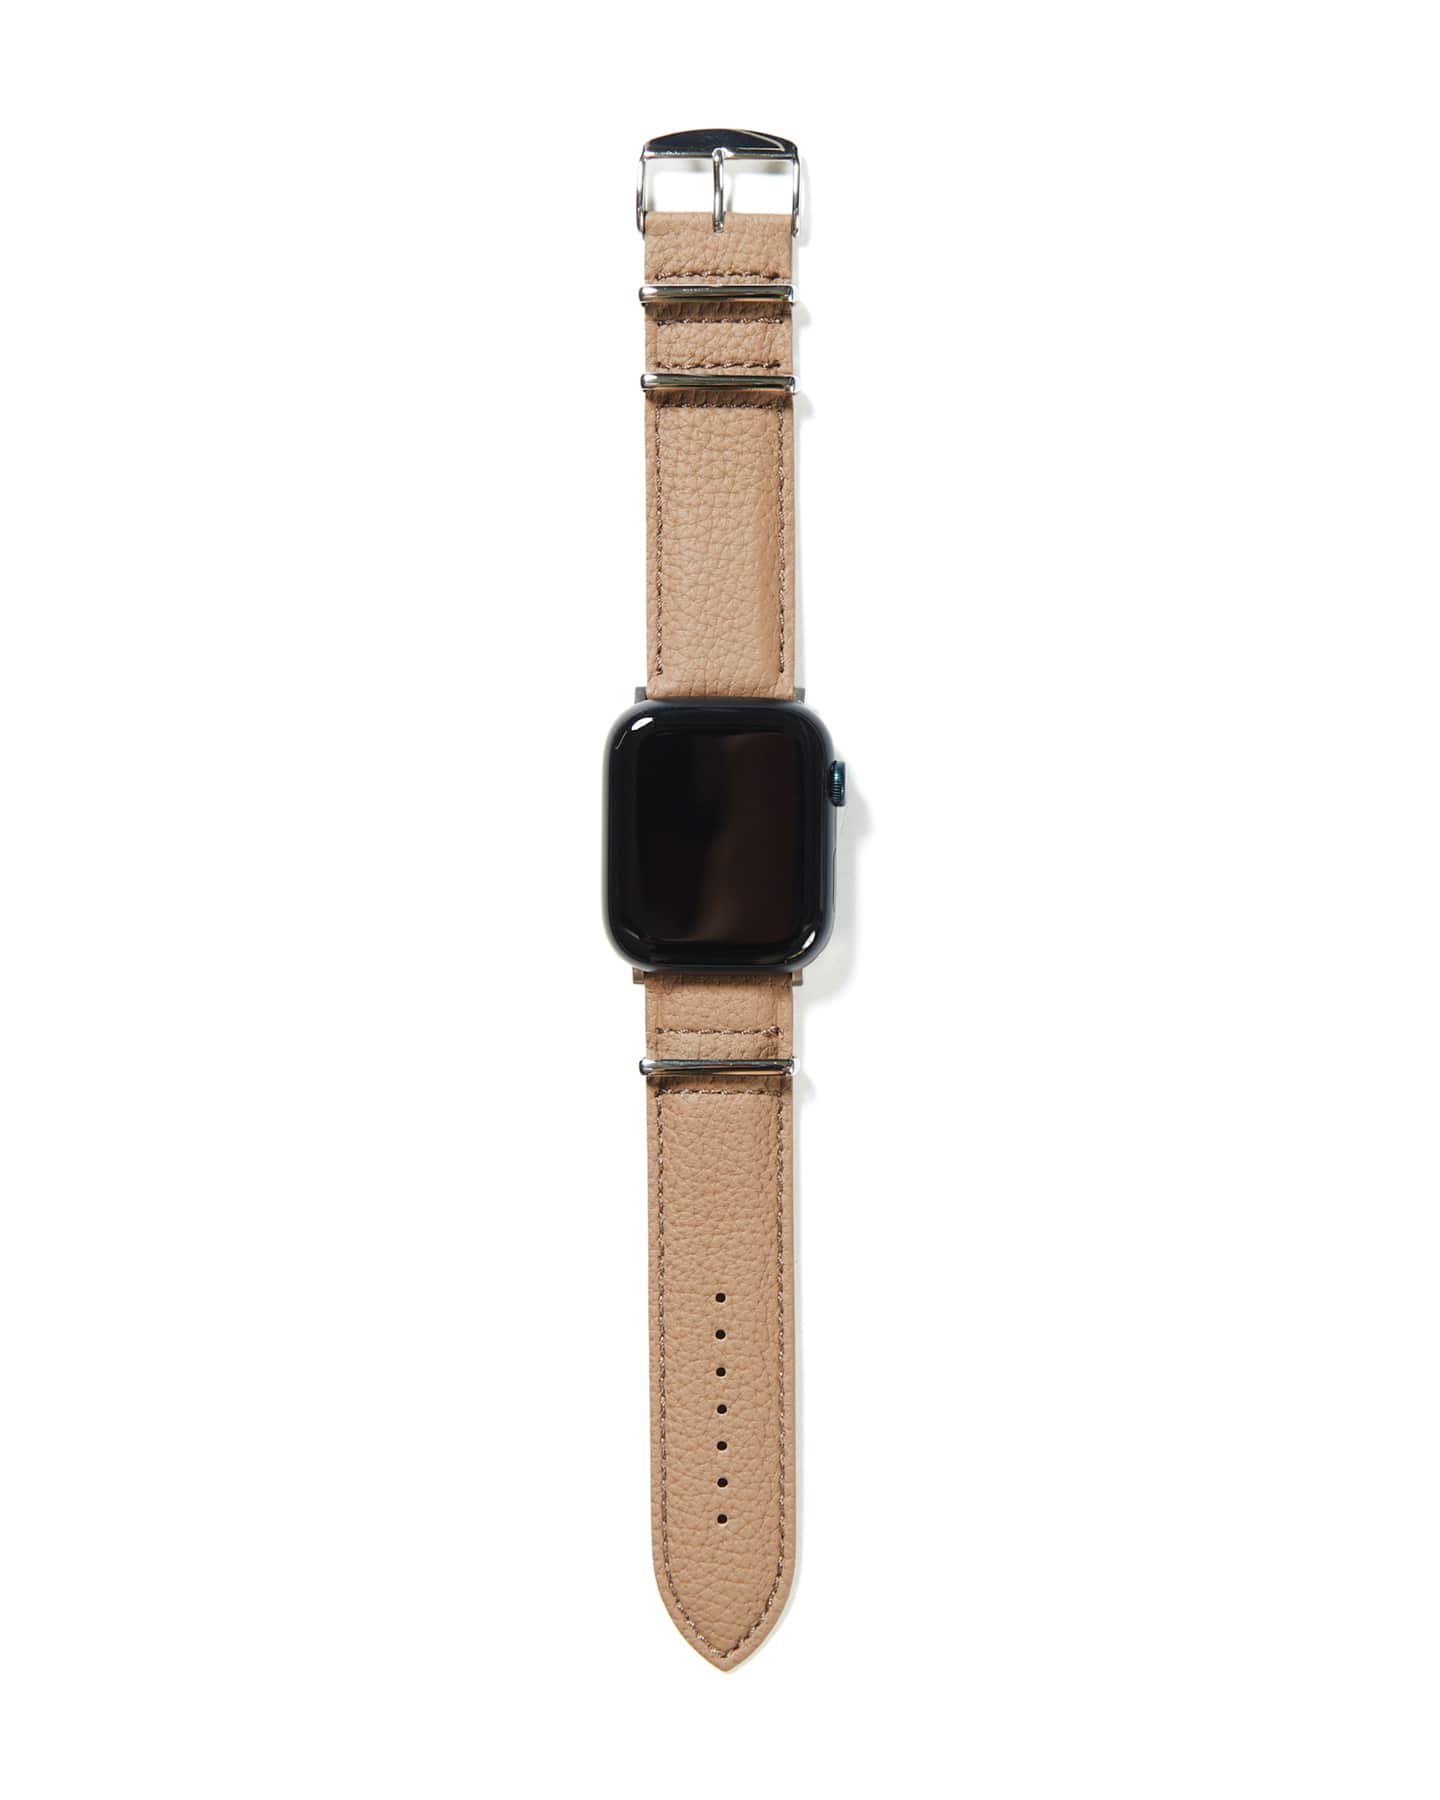 SOPH. | LEATHER WATCH BAND for Apple Watch(FREE CAMEL):